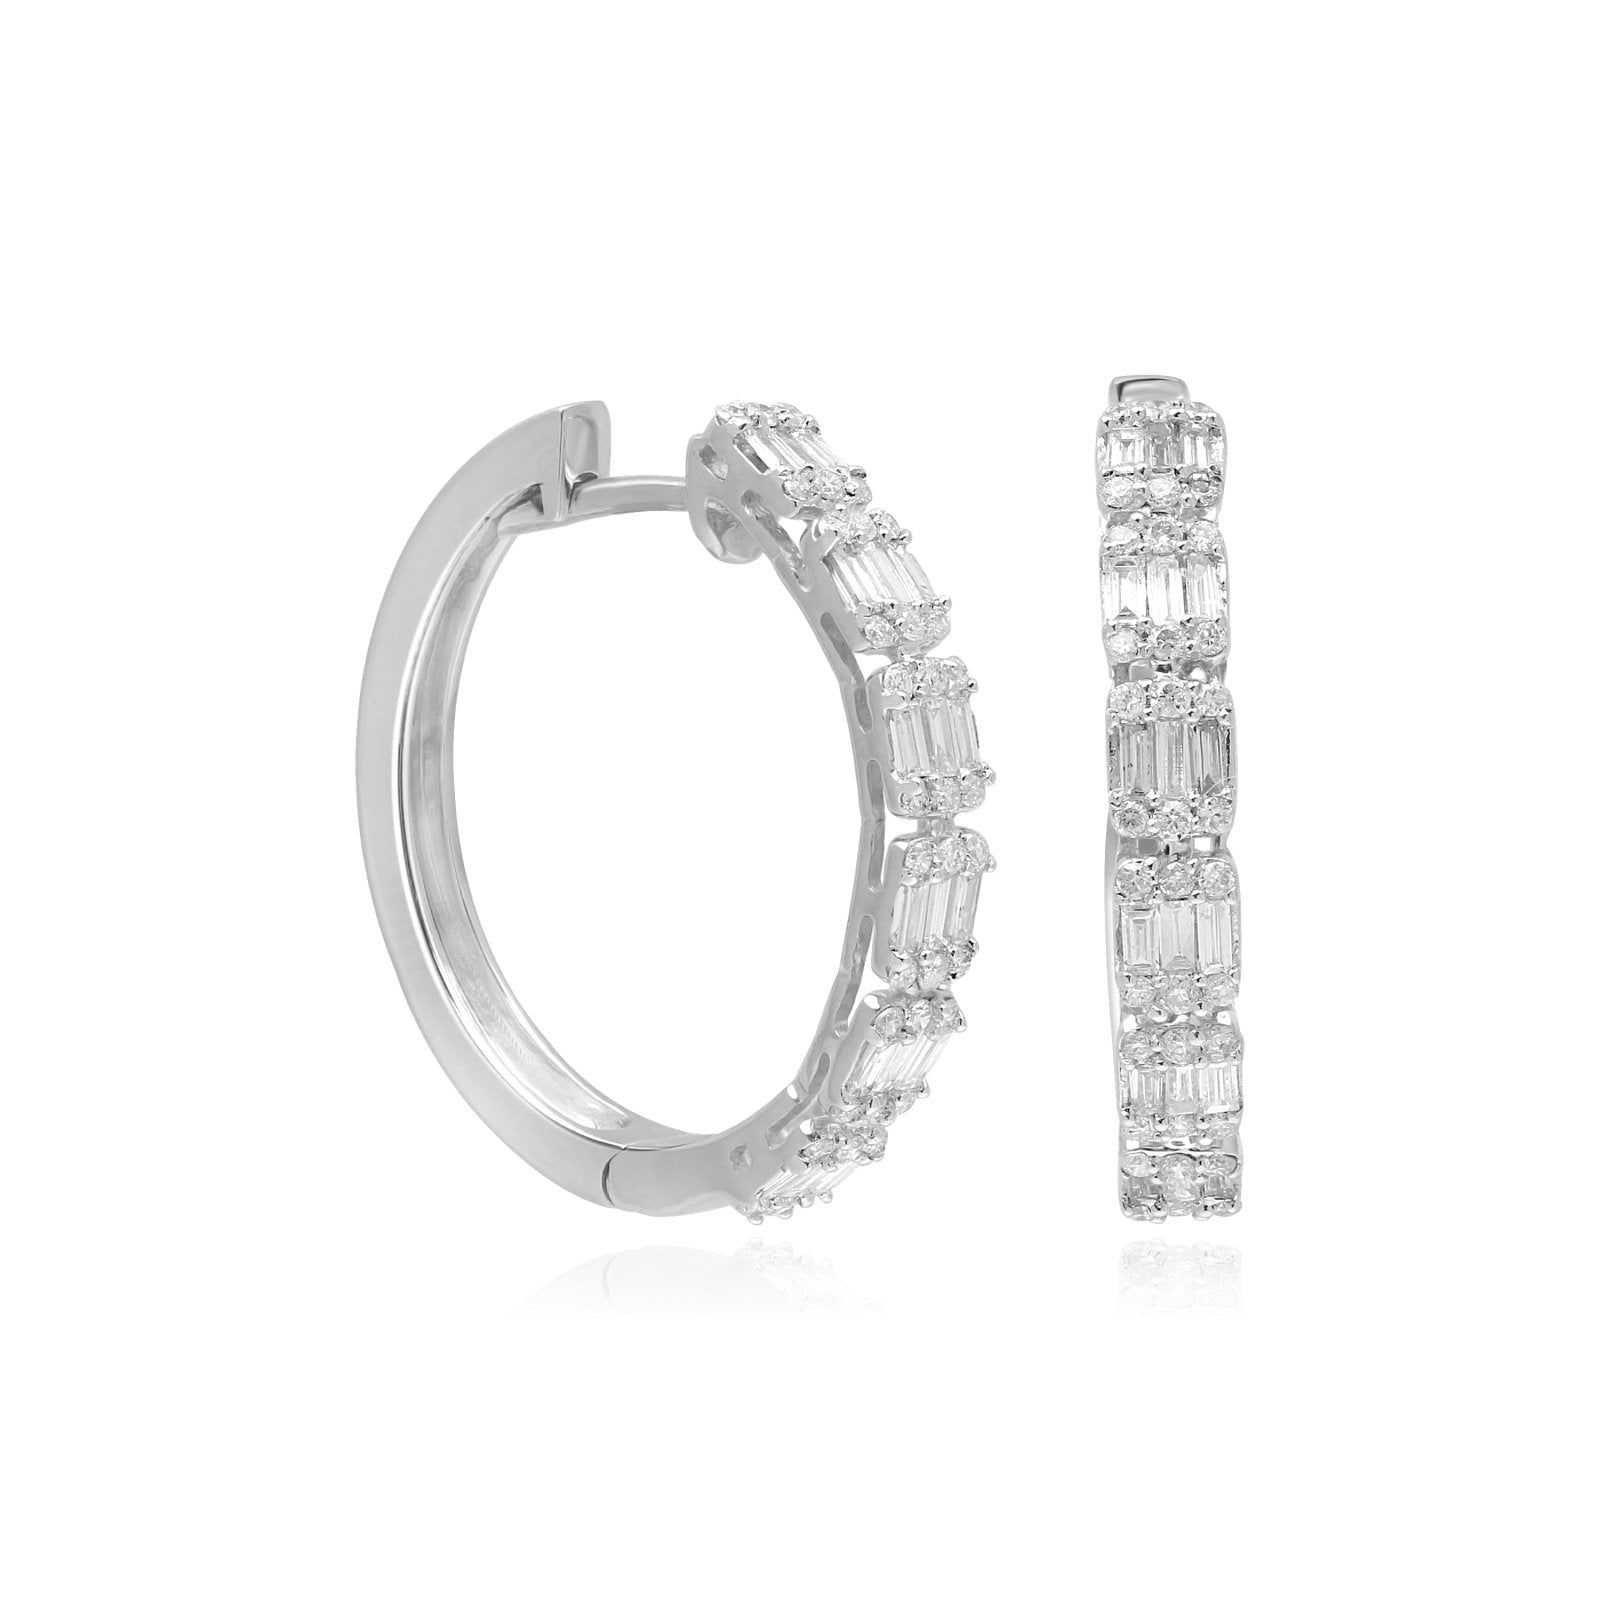 Baguette Diamond Circle Stud Hoops in Solid 18k White Gold Earrings Estella Collection #product_description# 18k Cartilage Earring cartilage hoop #tag4# #tag5# #tag6# #tag7# #tag8# #tag9# #tag10#